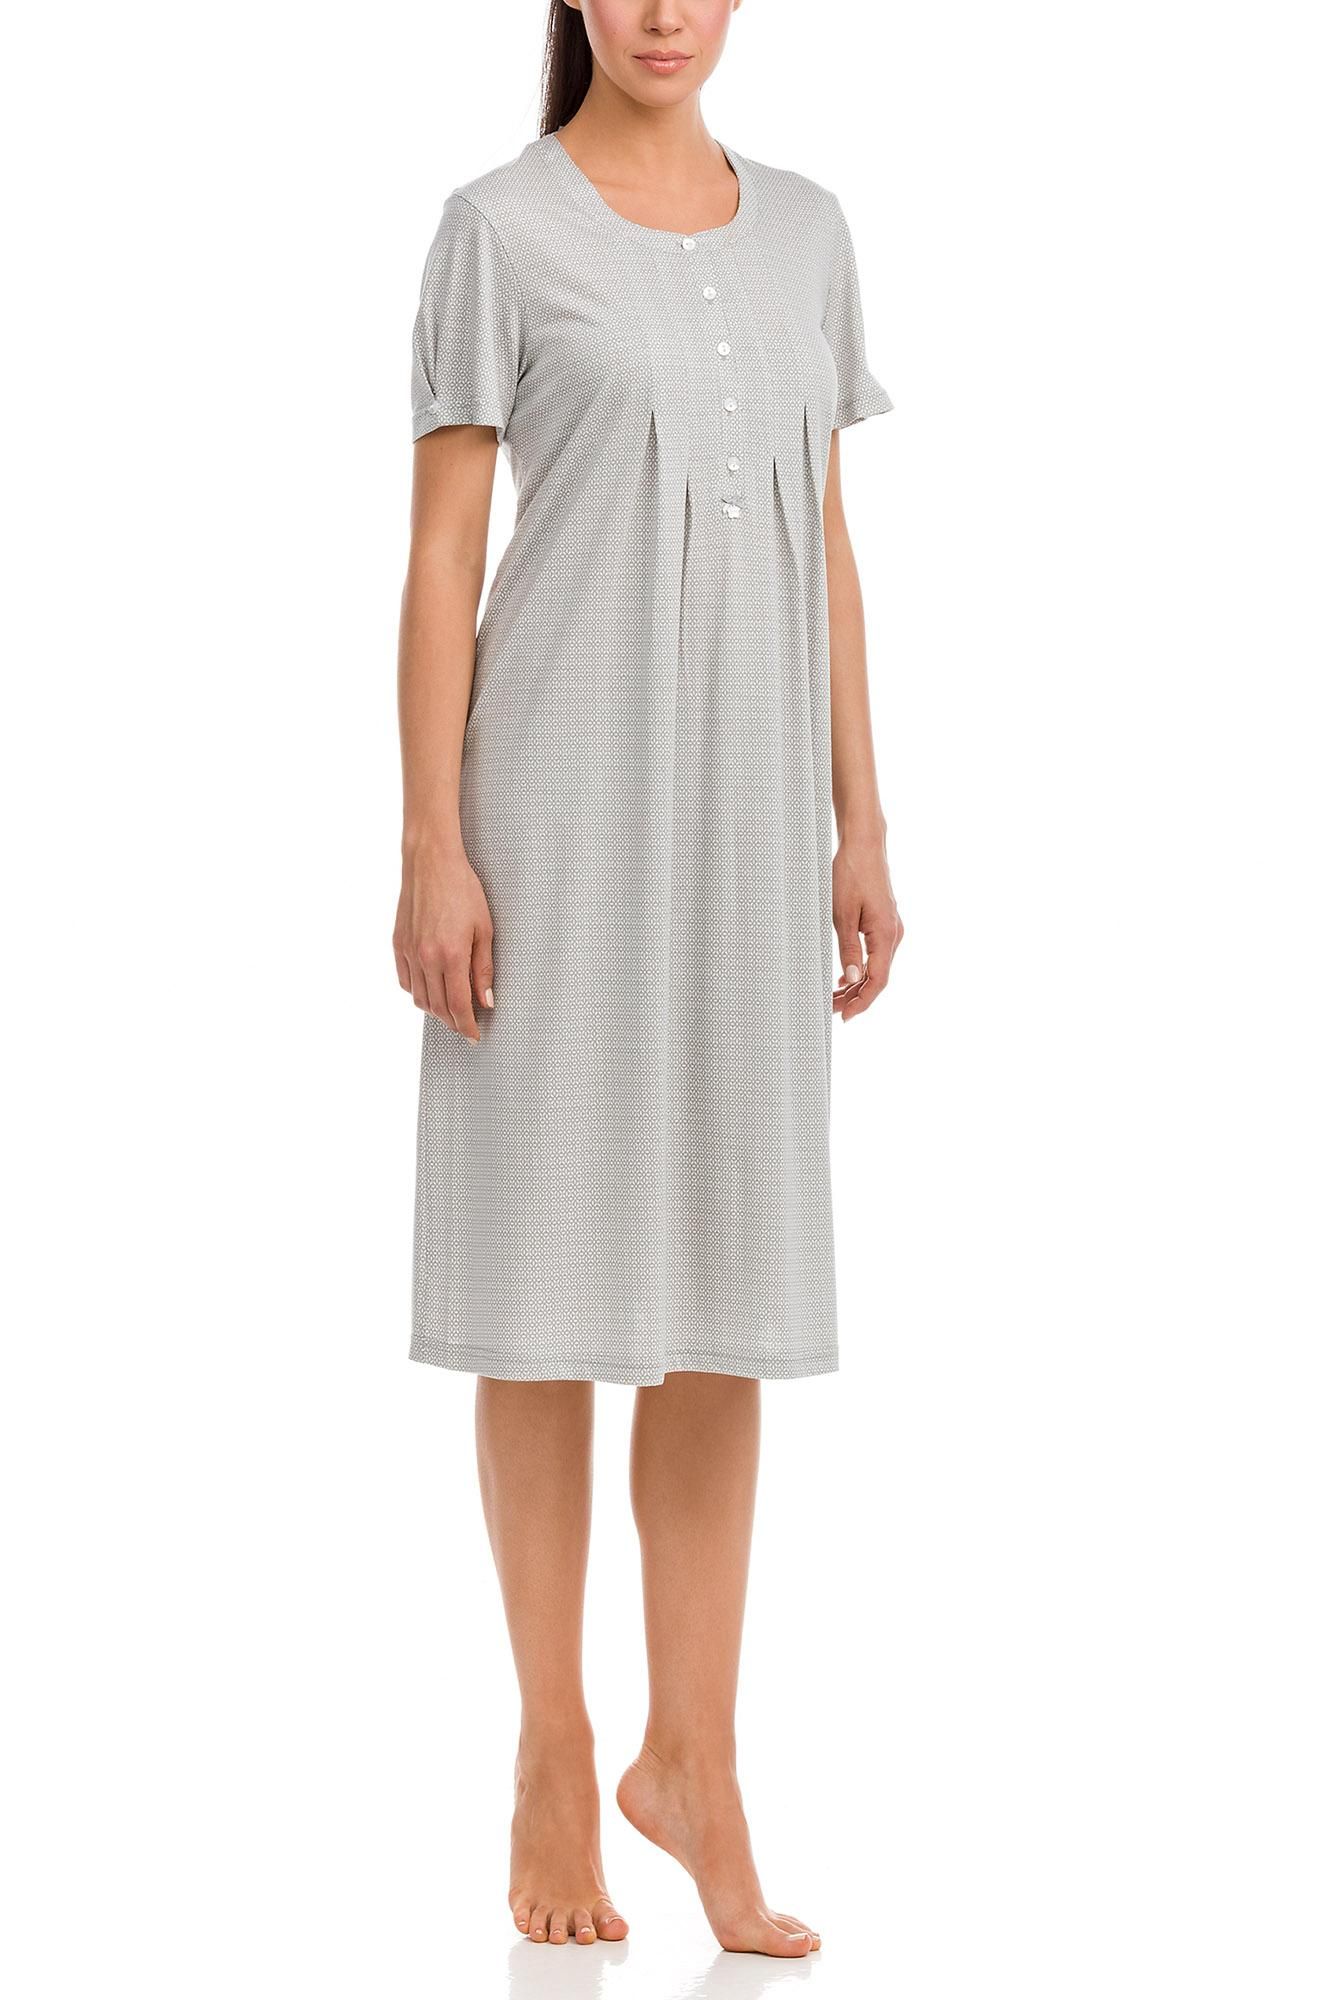 Women’s Patterned Nightgown